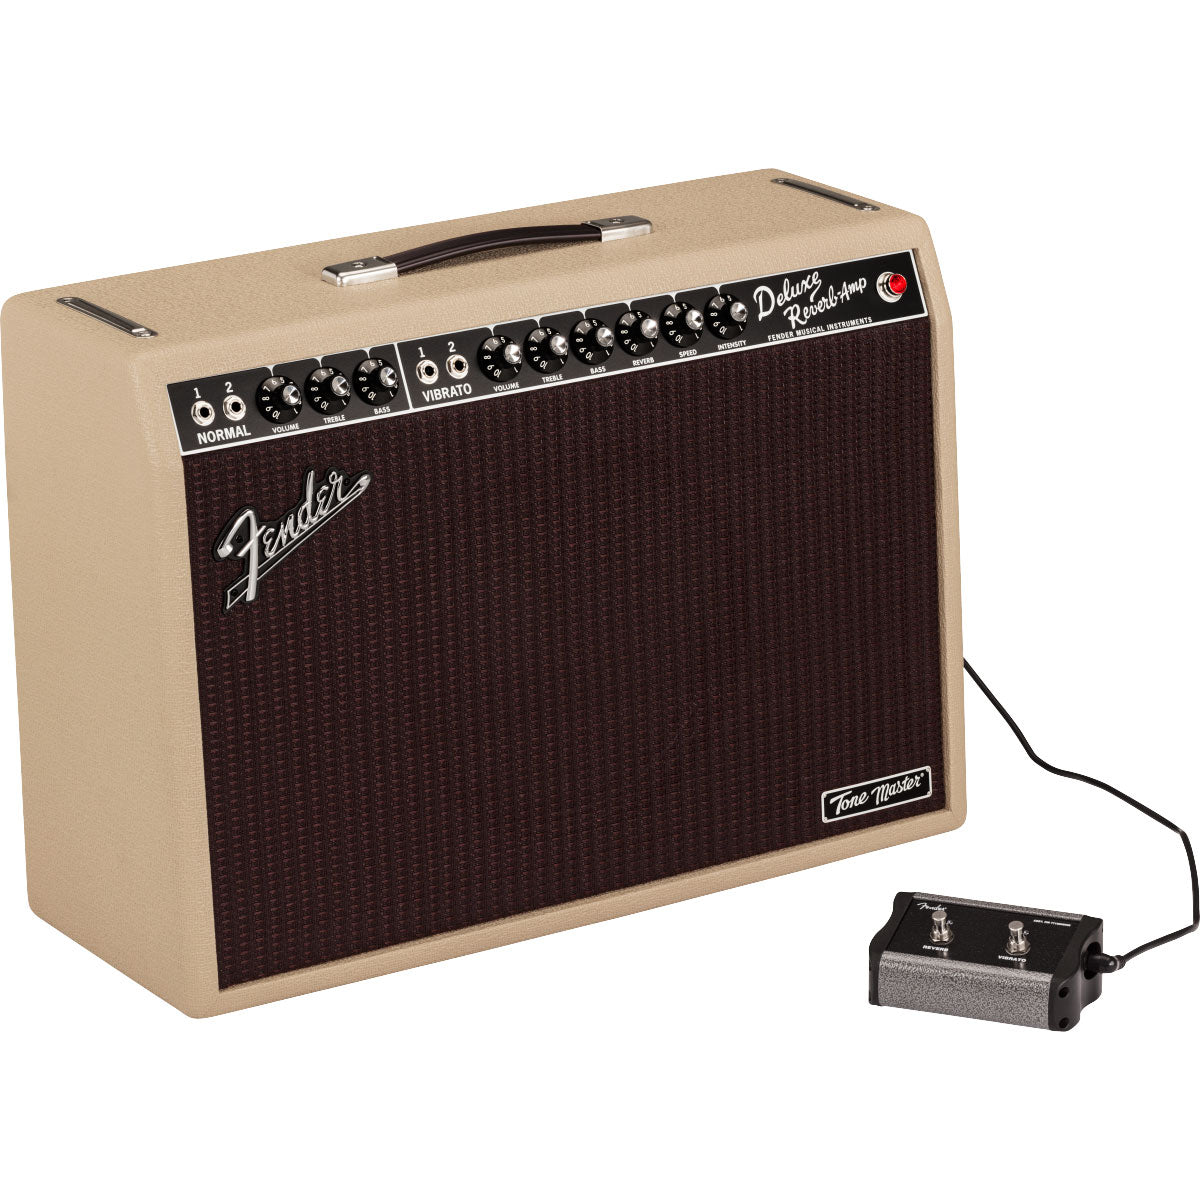 3/4 view of Fender Tone Master Deluxe Reverb Blonde Guitar Amplifier with included 2-button footswitch showing front, top and left side